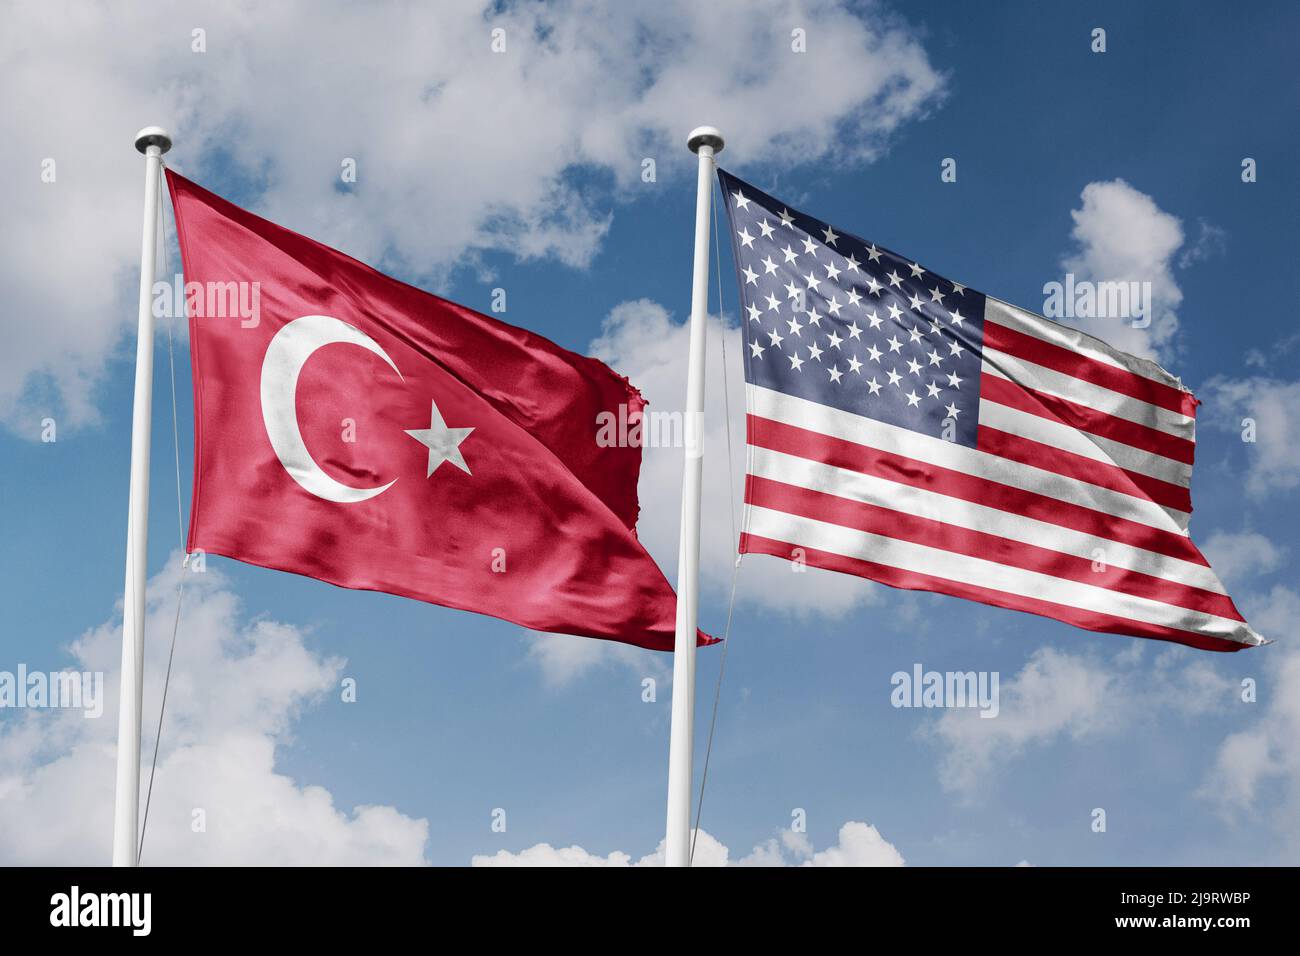 Turkey and United States two flags on flagpoles and blue cloudy sky background Stock Photo